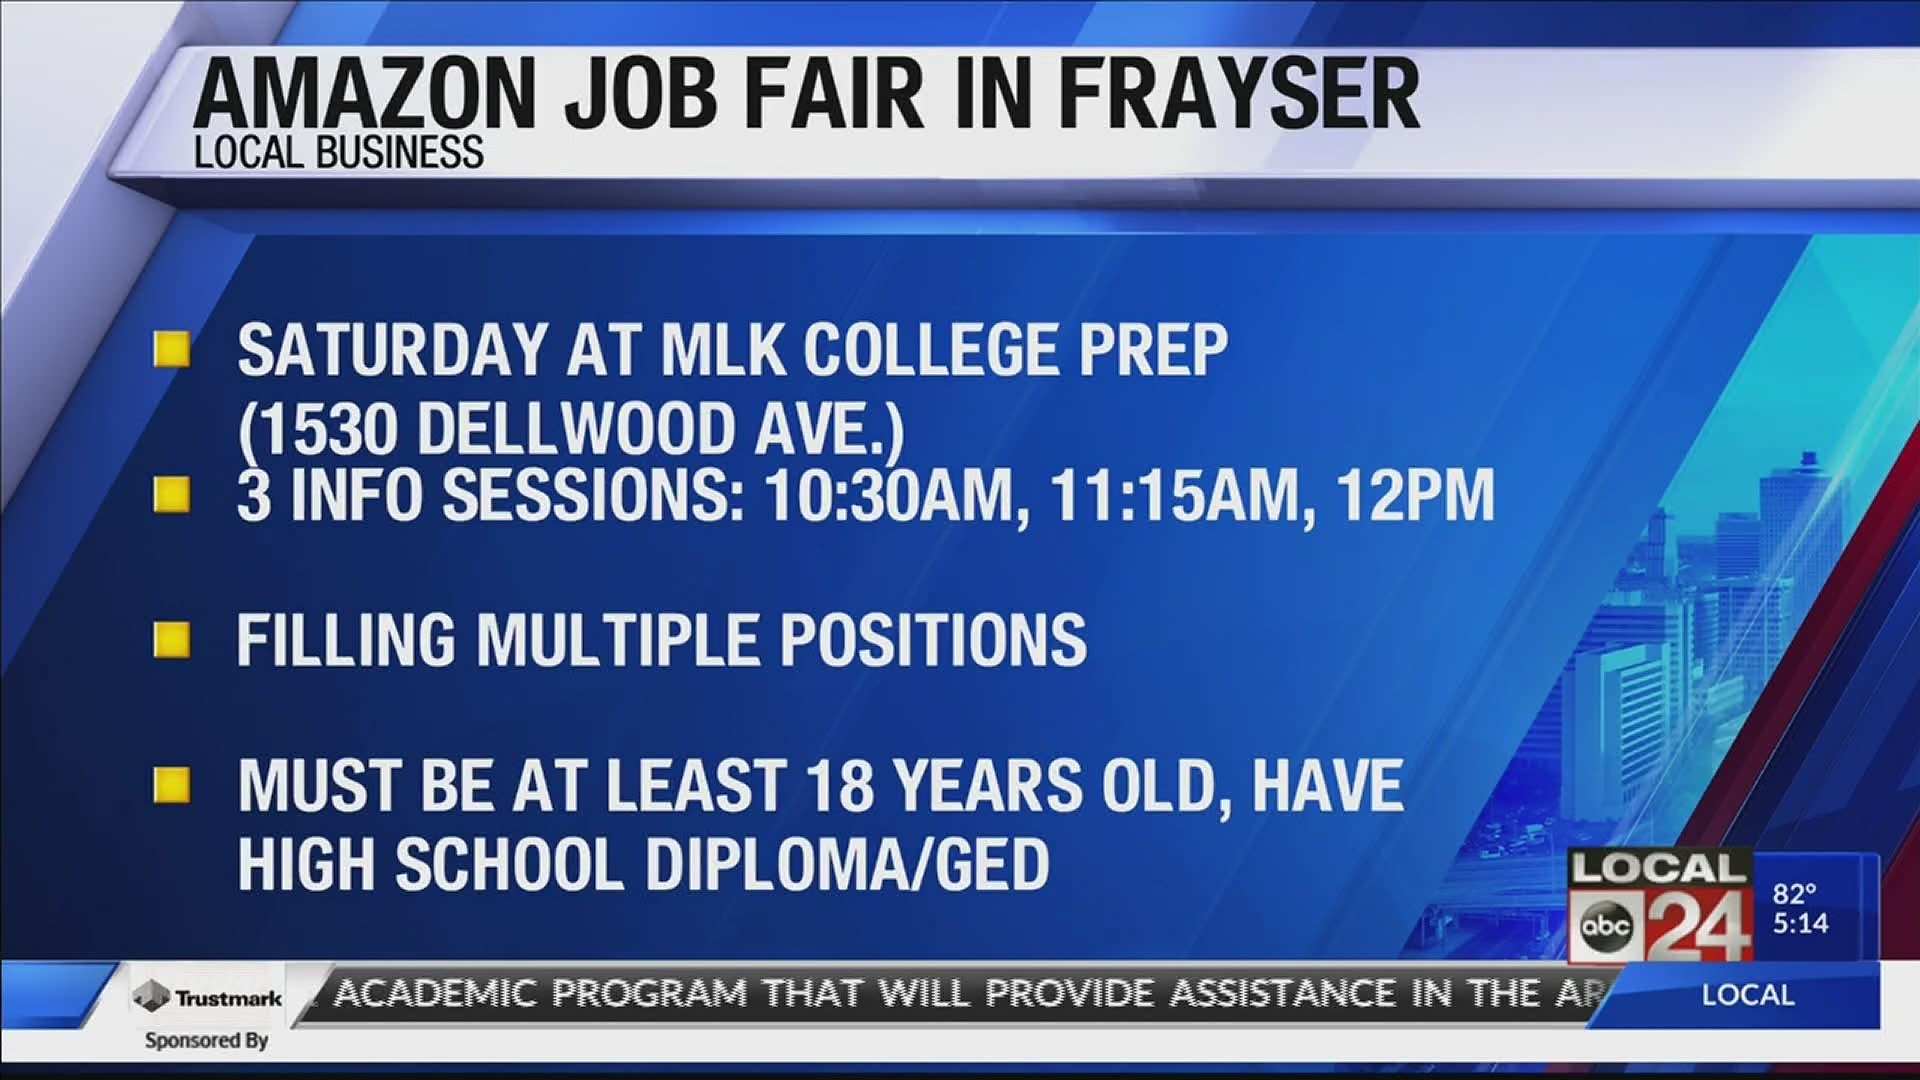 The job fair/information sessions run Saturday at 10:30 a.m., 11:15 a.m., and noon, at MLK College Prep.